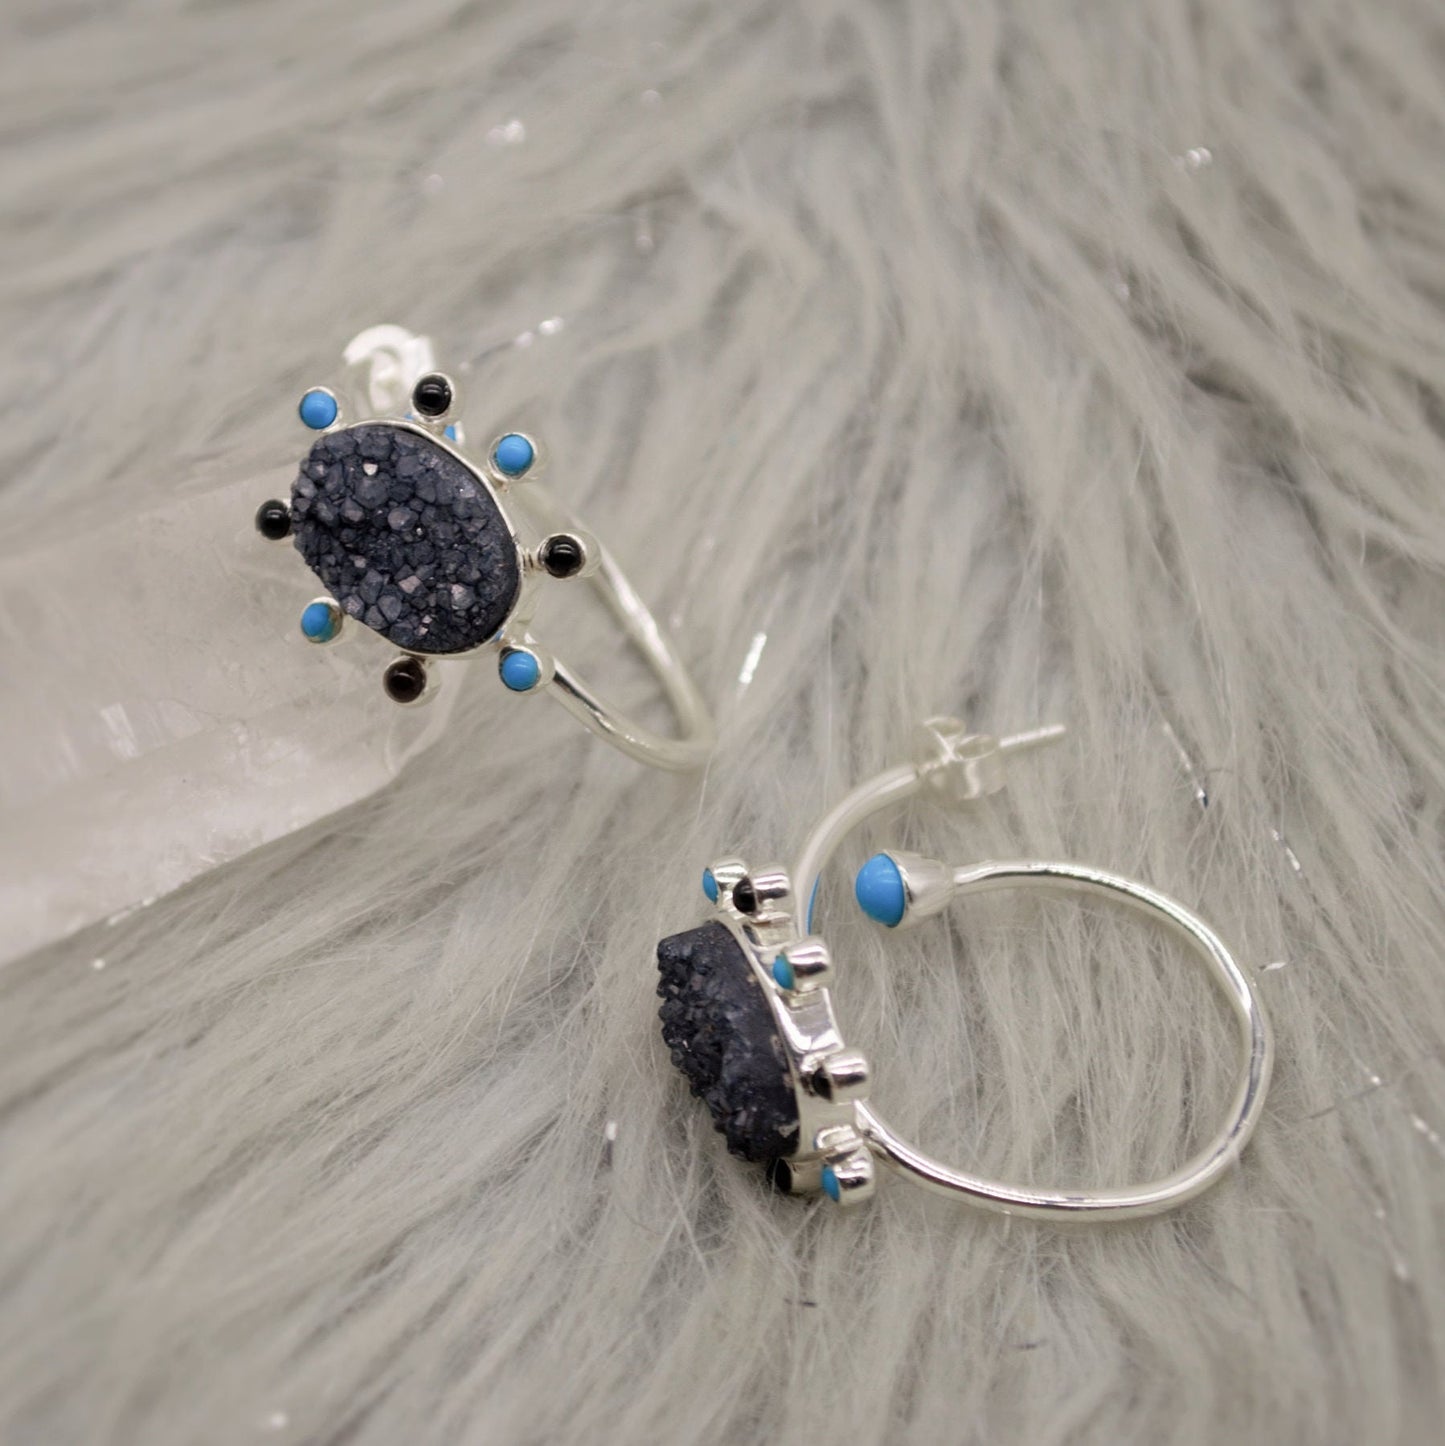 Black Onyx, Agate, Turquoise Earrings, Sterling Silver, Turquoise Birthstone Jewelry, Unique Druzy Gemstone Earrings